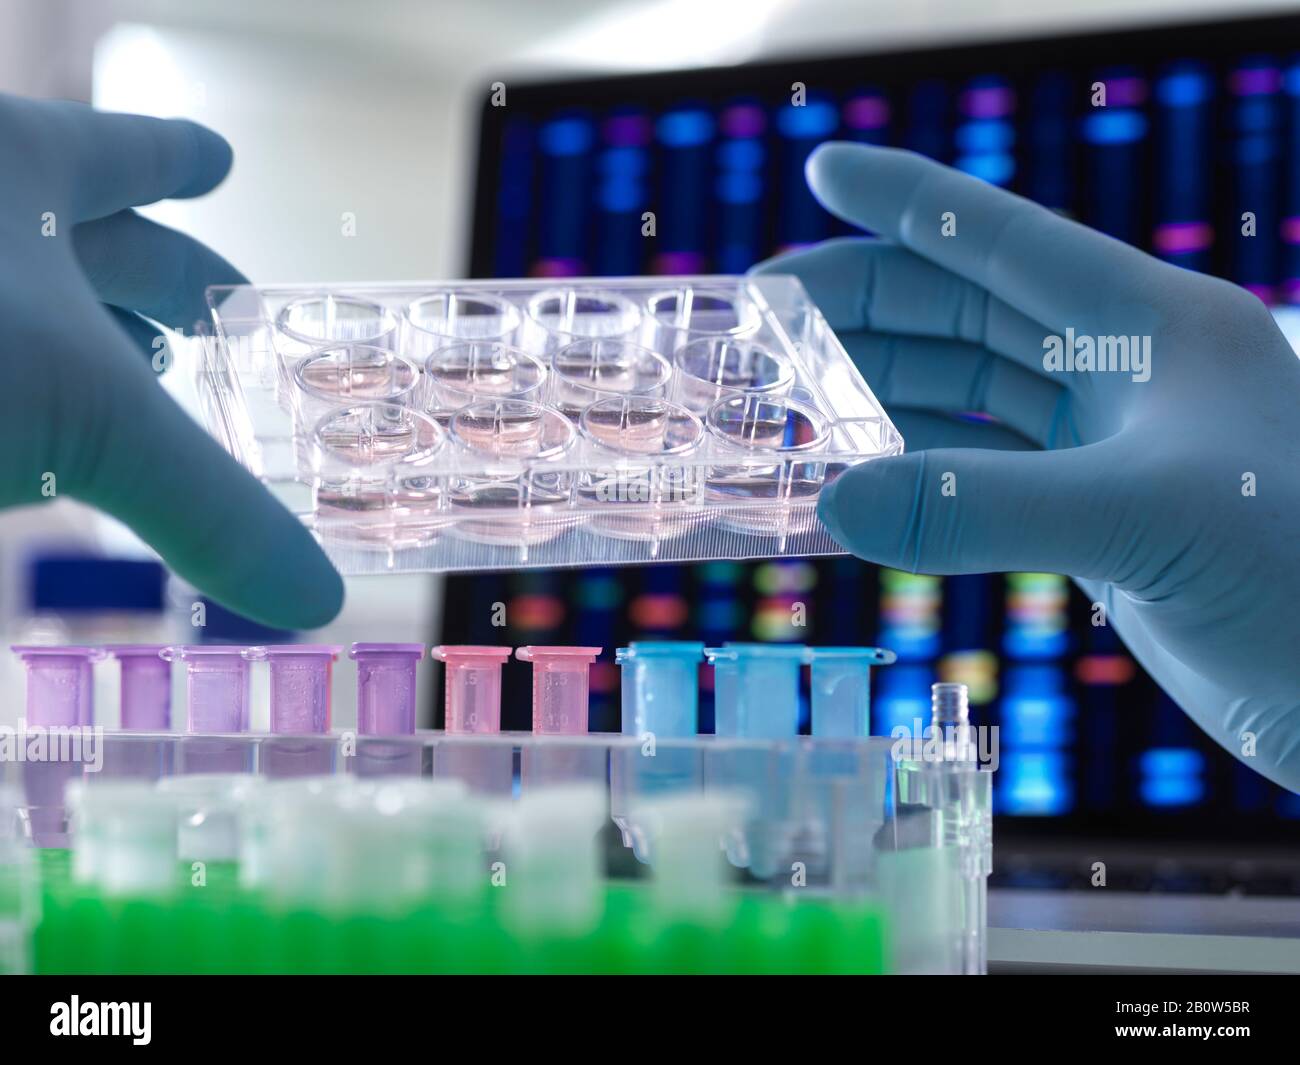 Scientist pipetting DNA samples into microcentrifuge tubes during an experiment in the laboratory with the DNA profile on the monitor screen. Stock Photo